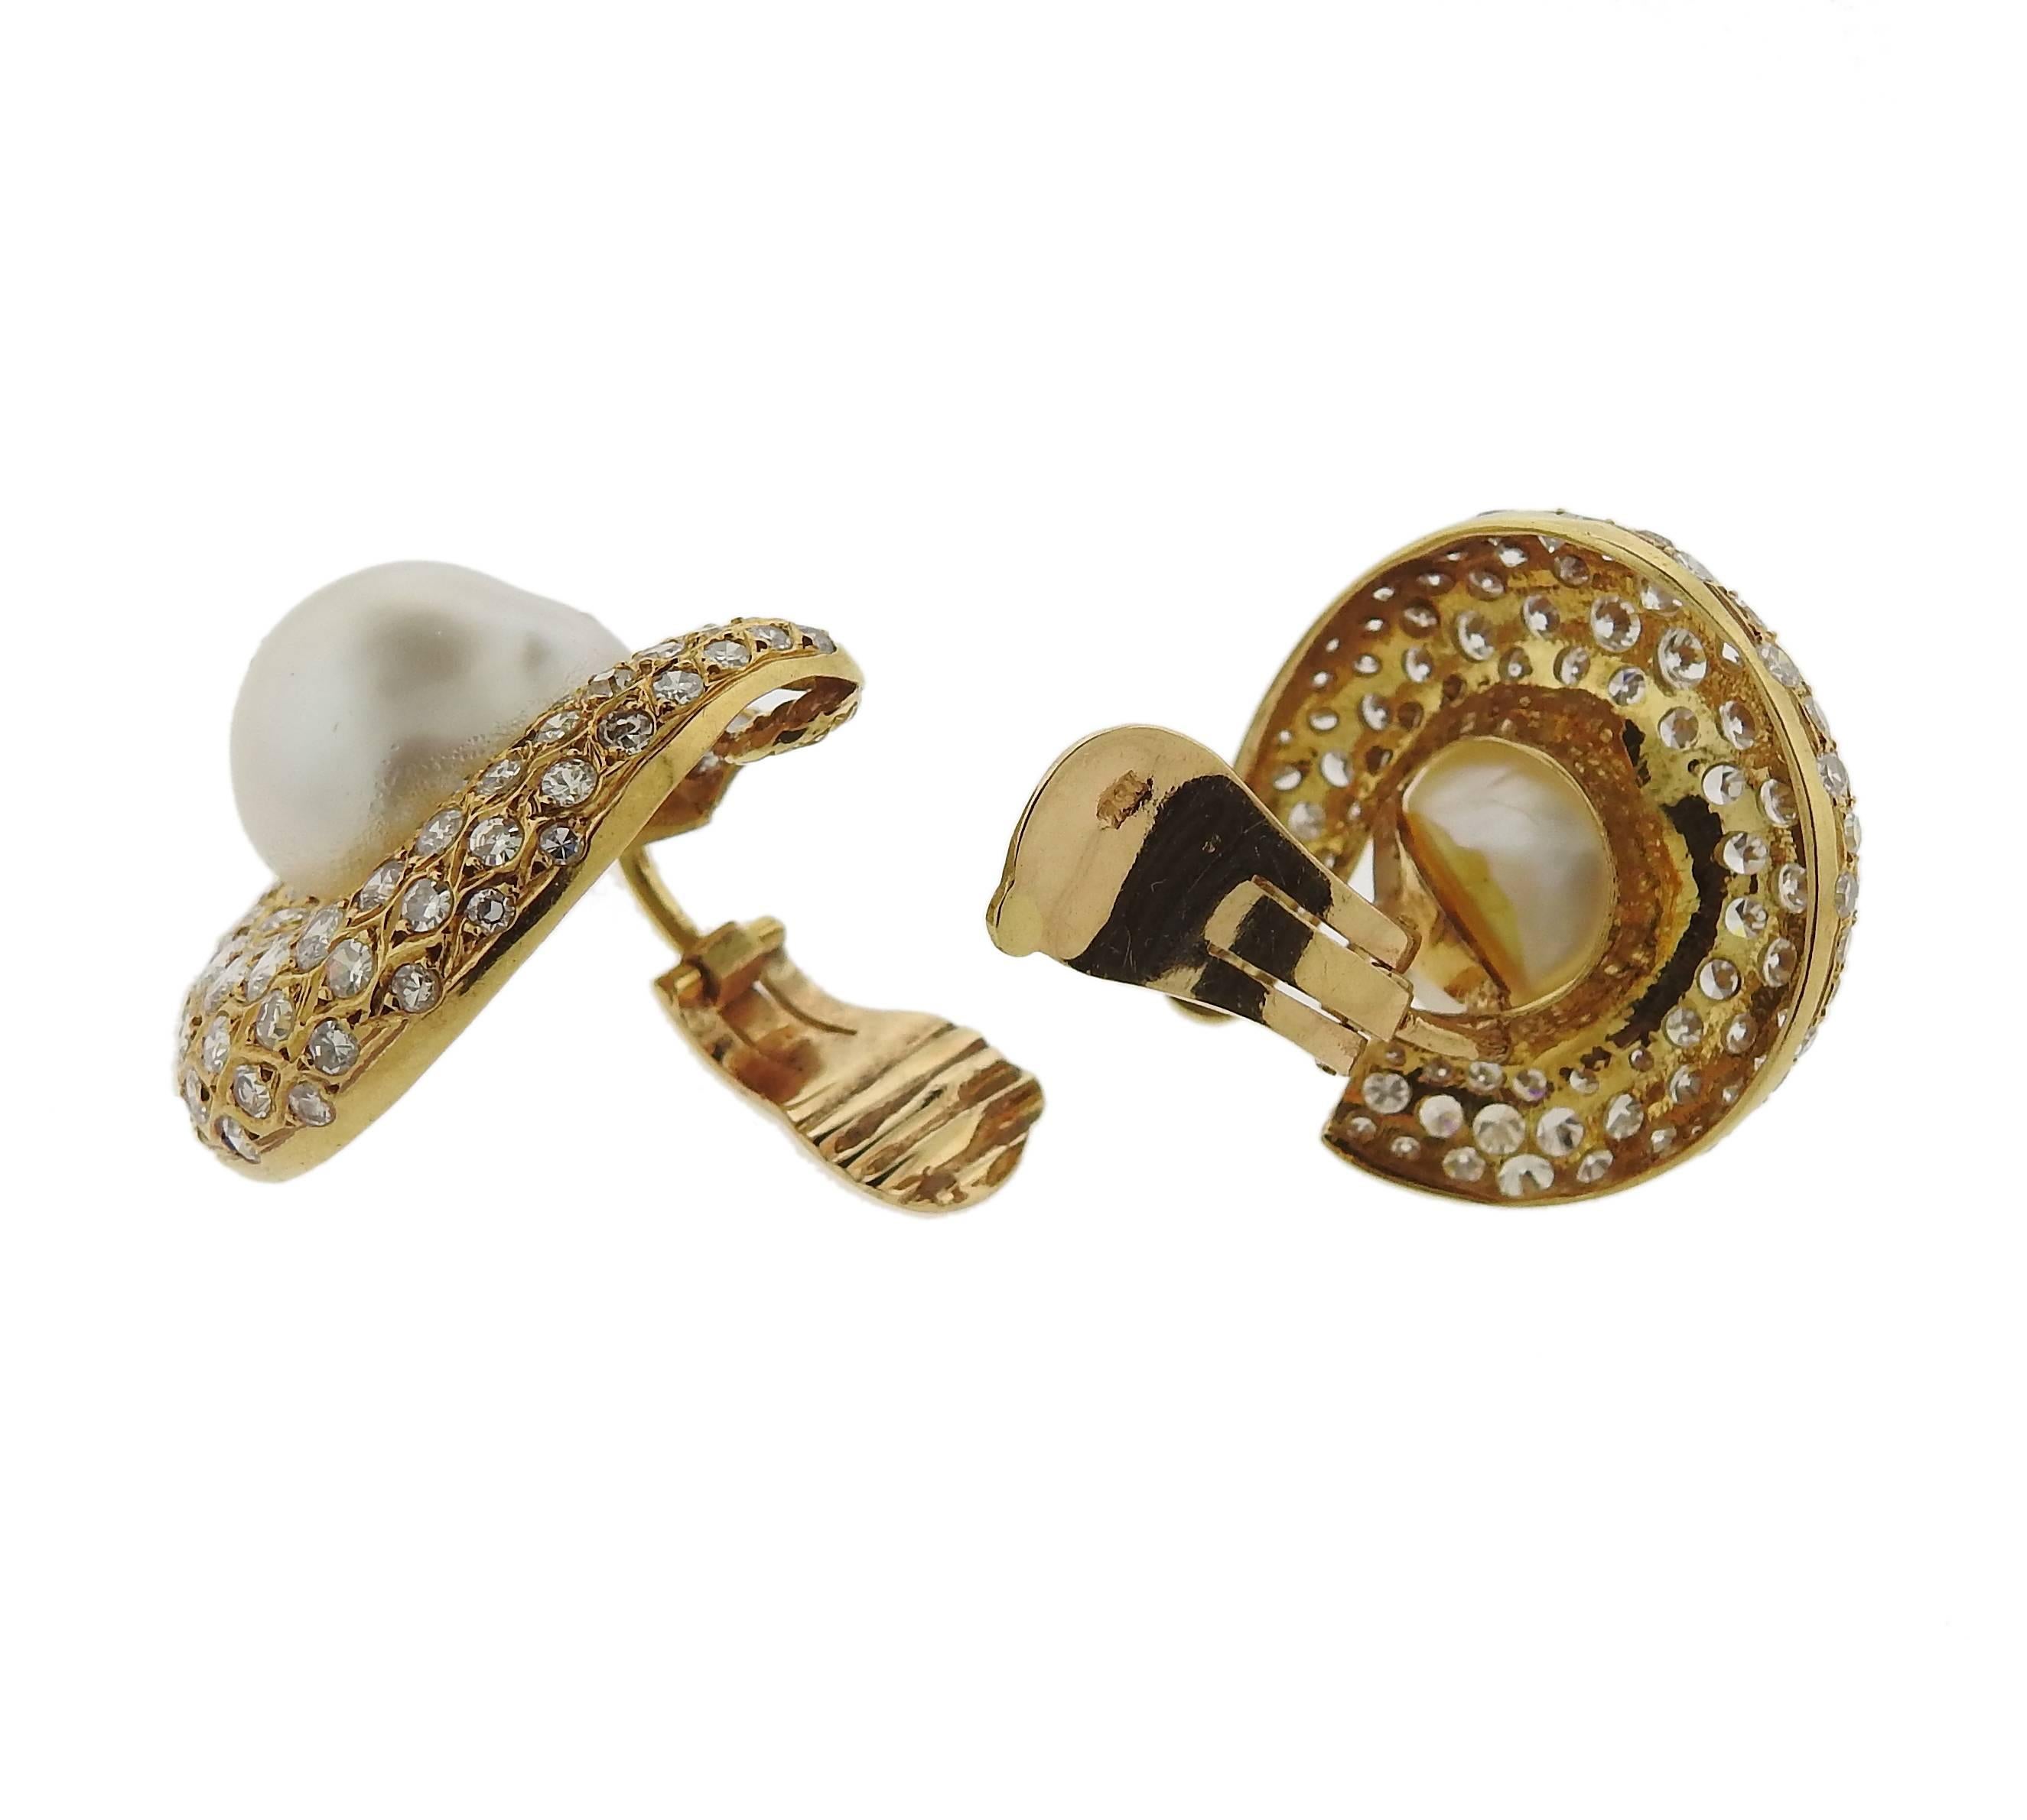 A lovely pair of 18k gold pearl earrings. Set with approximately 6 carats of GH/VS diamonds and a 14.5mm south sea pearl. Earrings measure 30mm X 26mm. Weight is 27.9 grams.